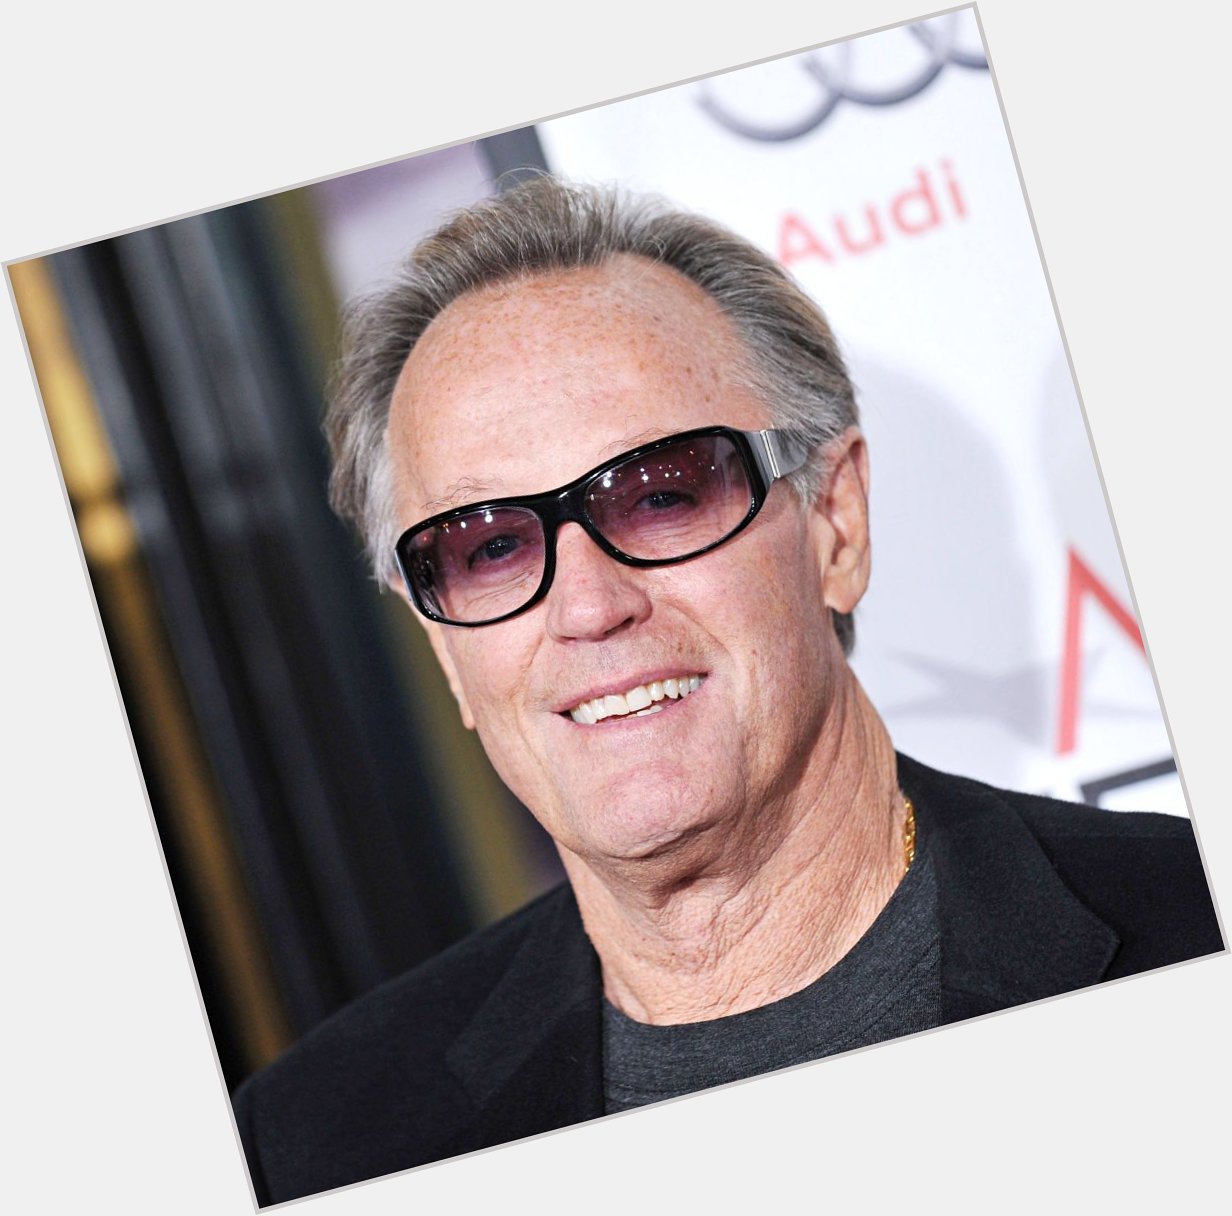 Happy Birthday Peter Fonda! I\m hip about time. -as Captain America in Easy Rider 